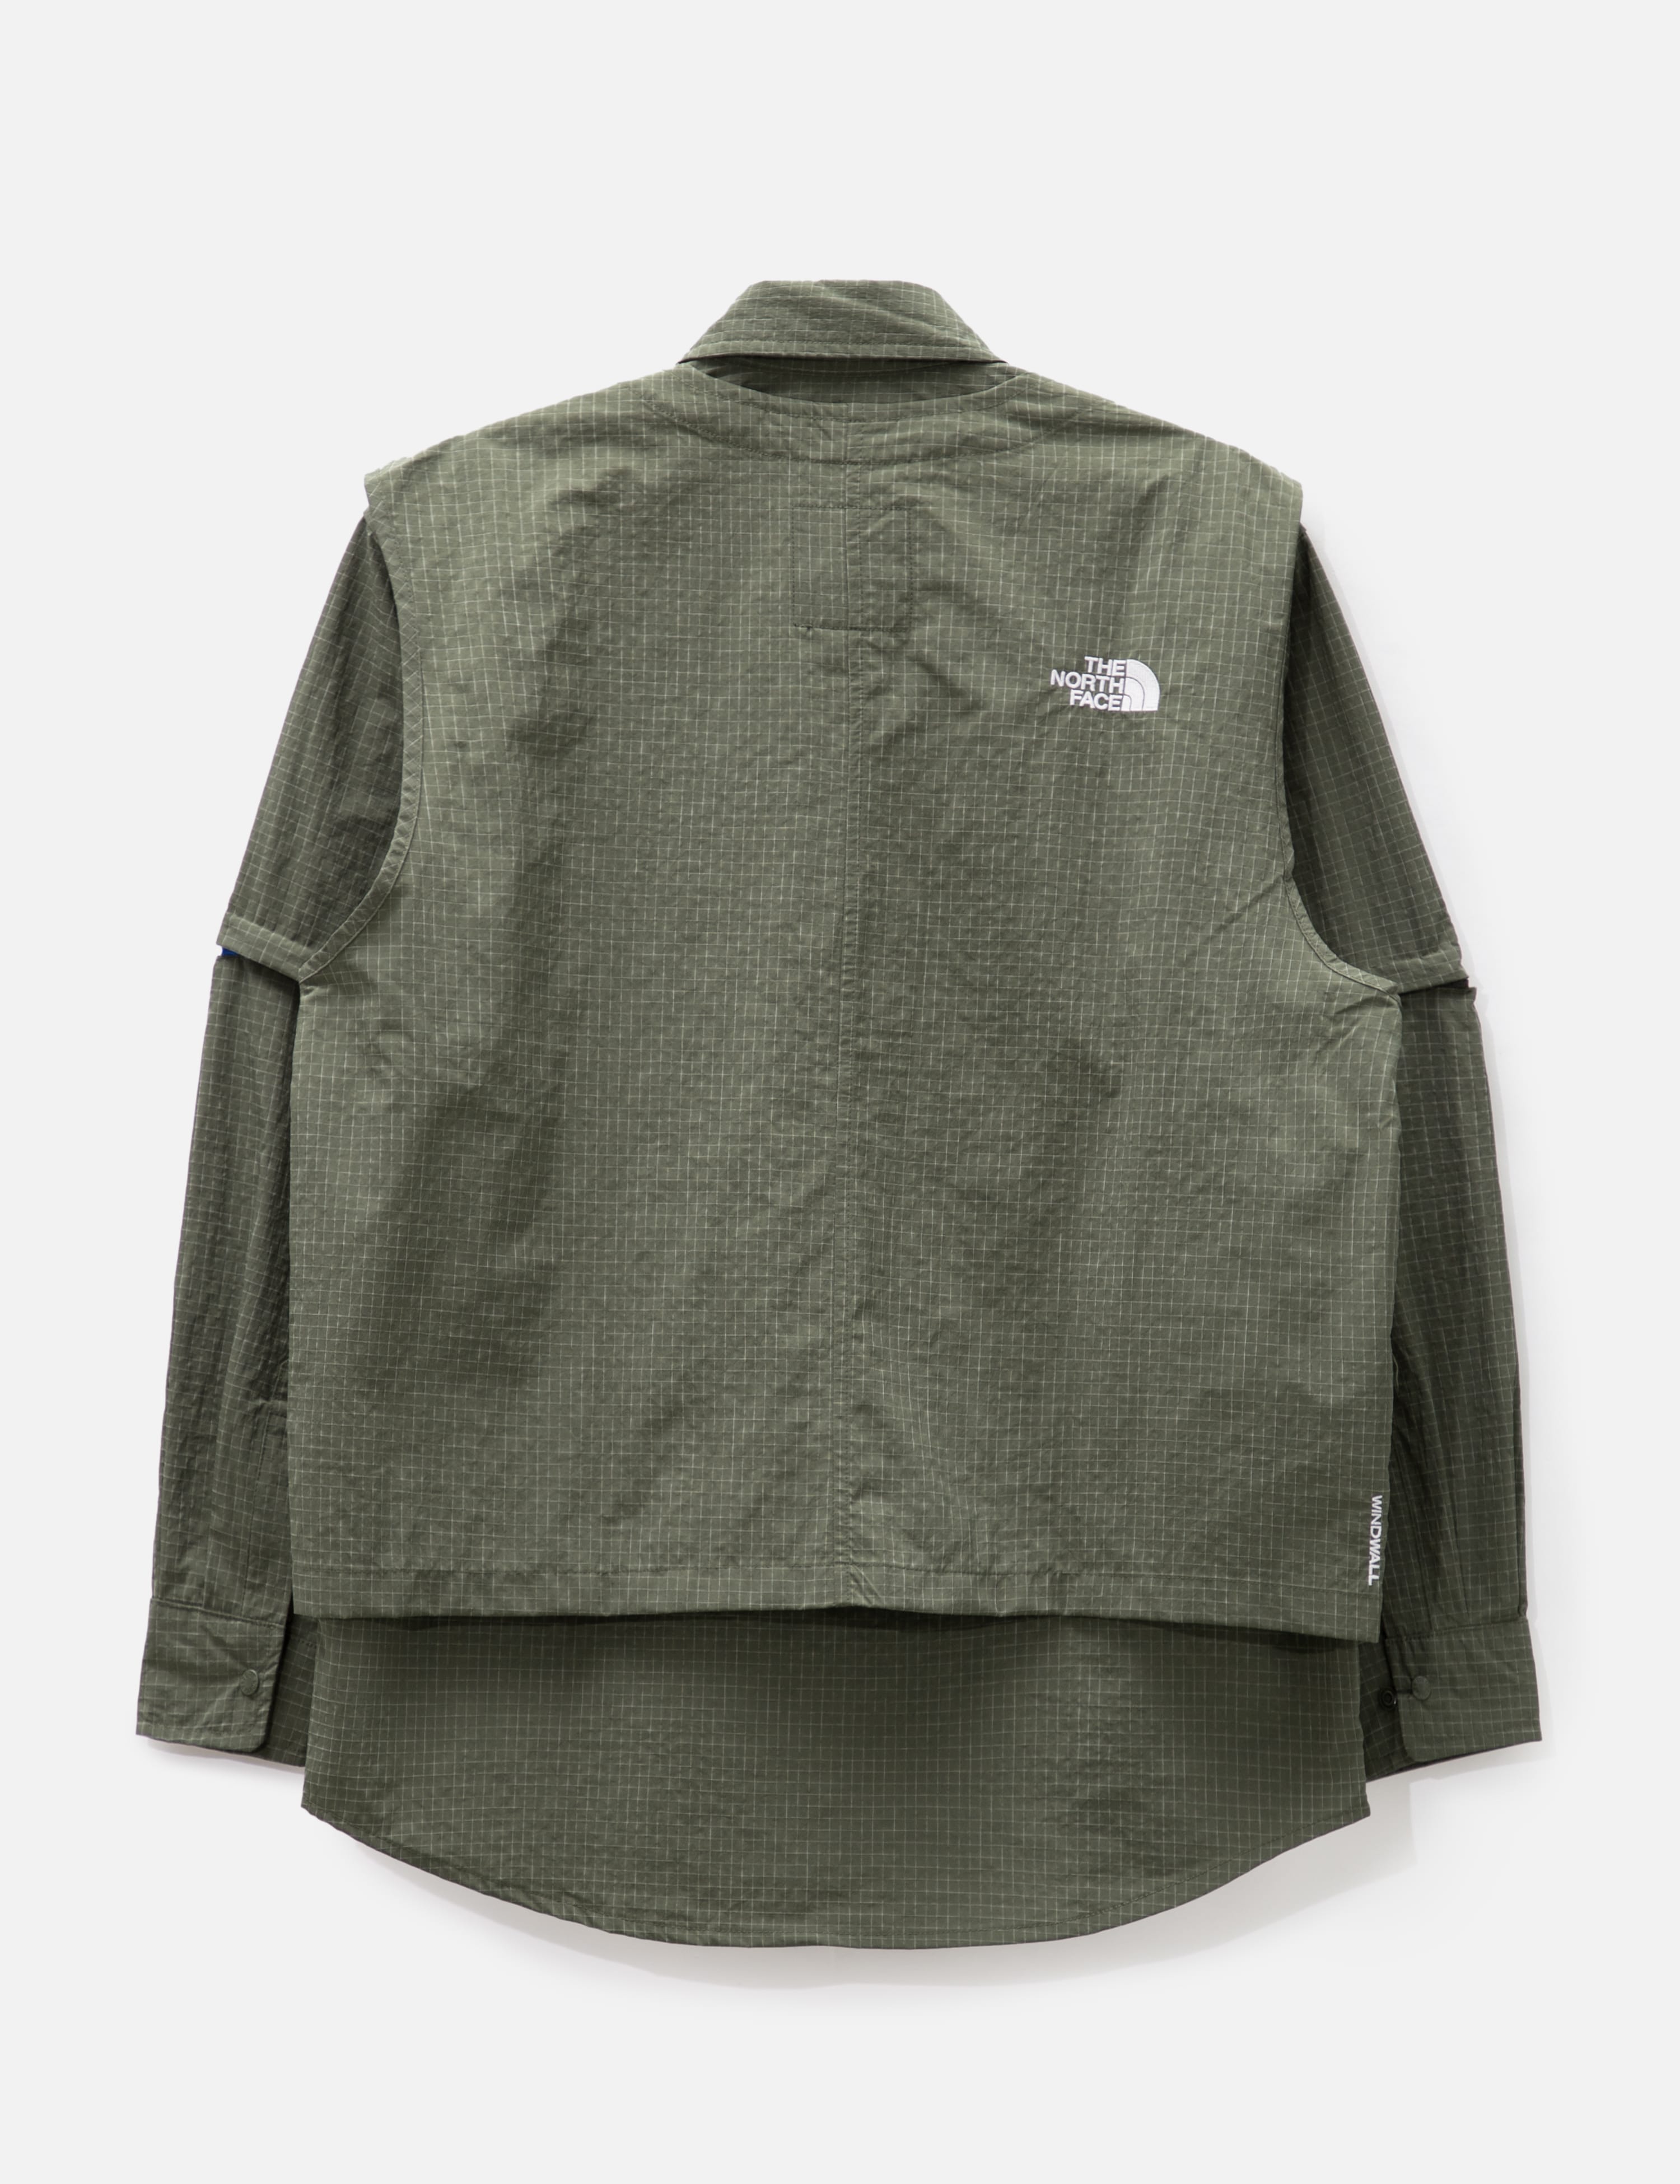 The North Face - 2 in 1 Shirt | HBX - Globally Curated Fashion and